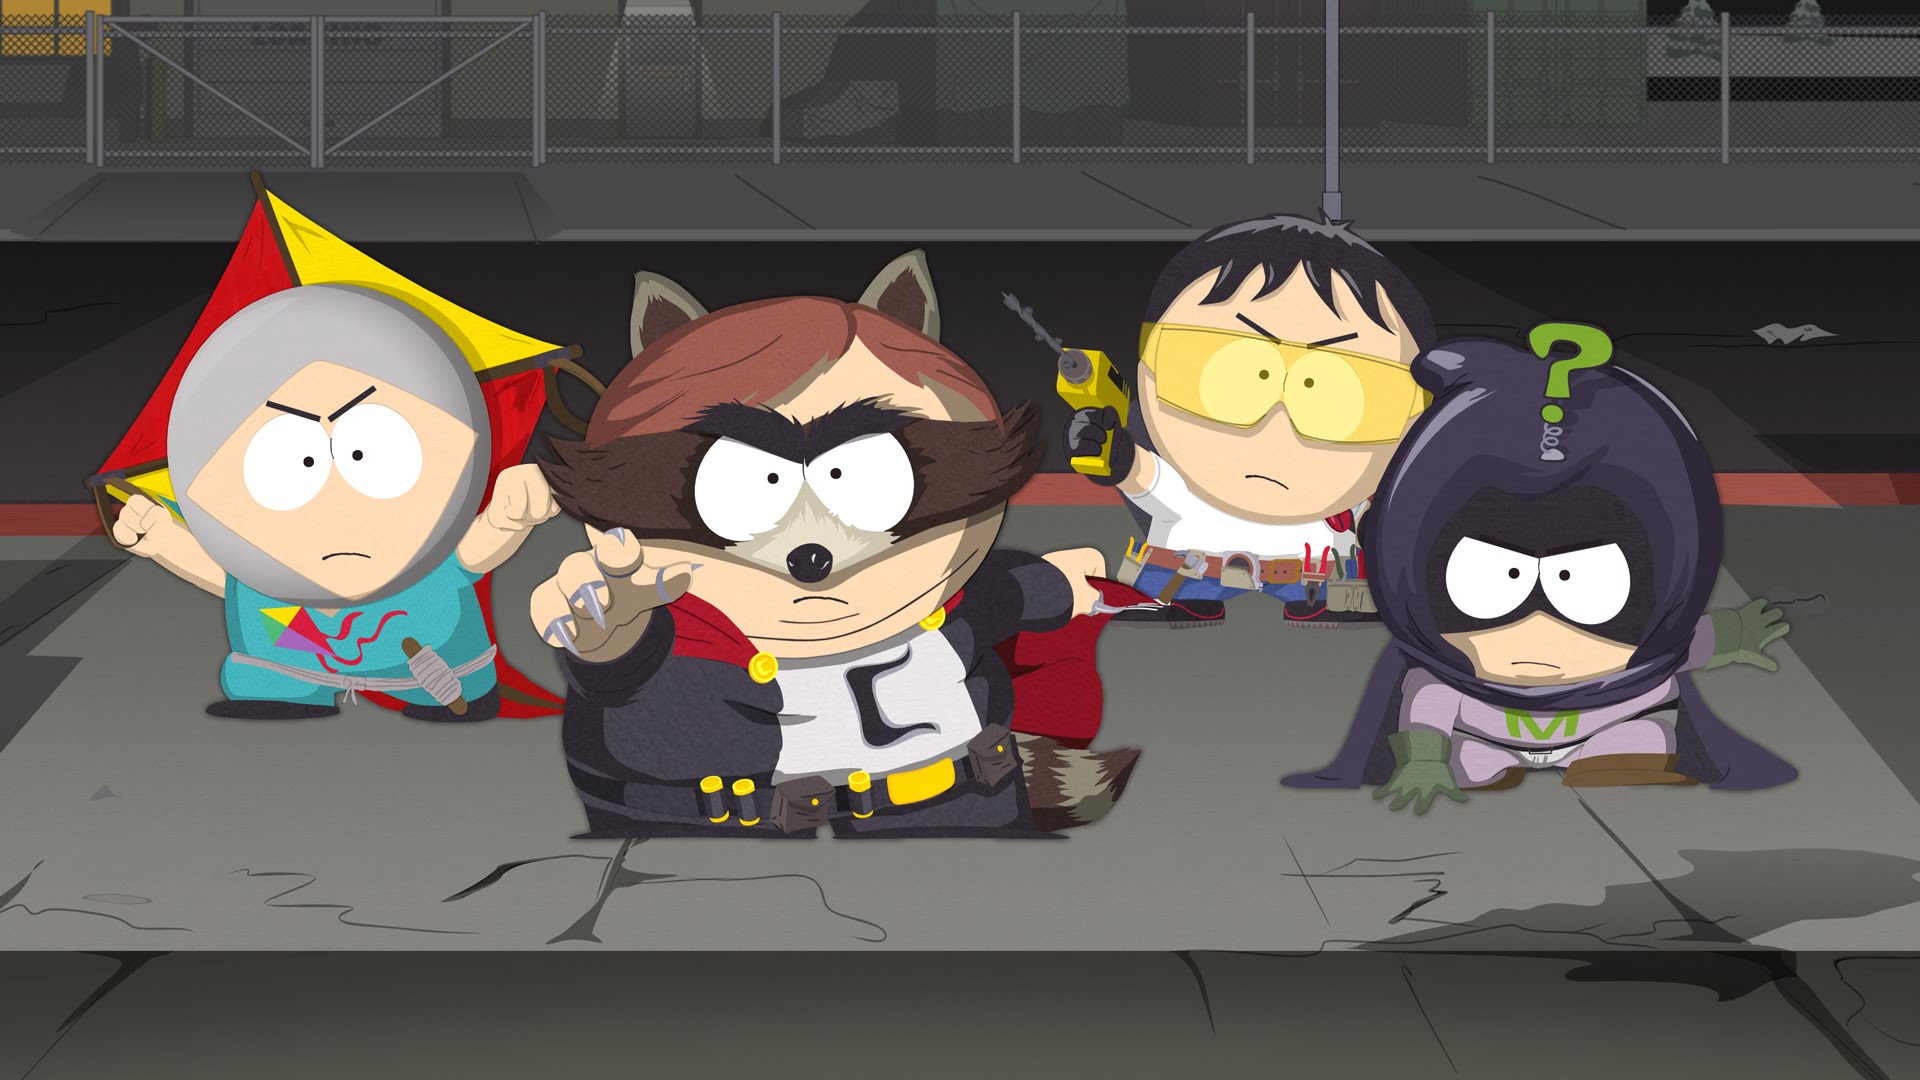 South Park: The Fractured Butt Whole. Produced by Ubisoft and available on Xbox One, PS4 and PC